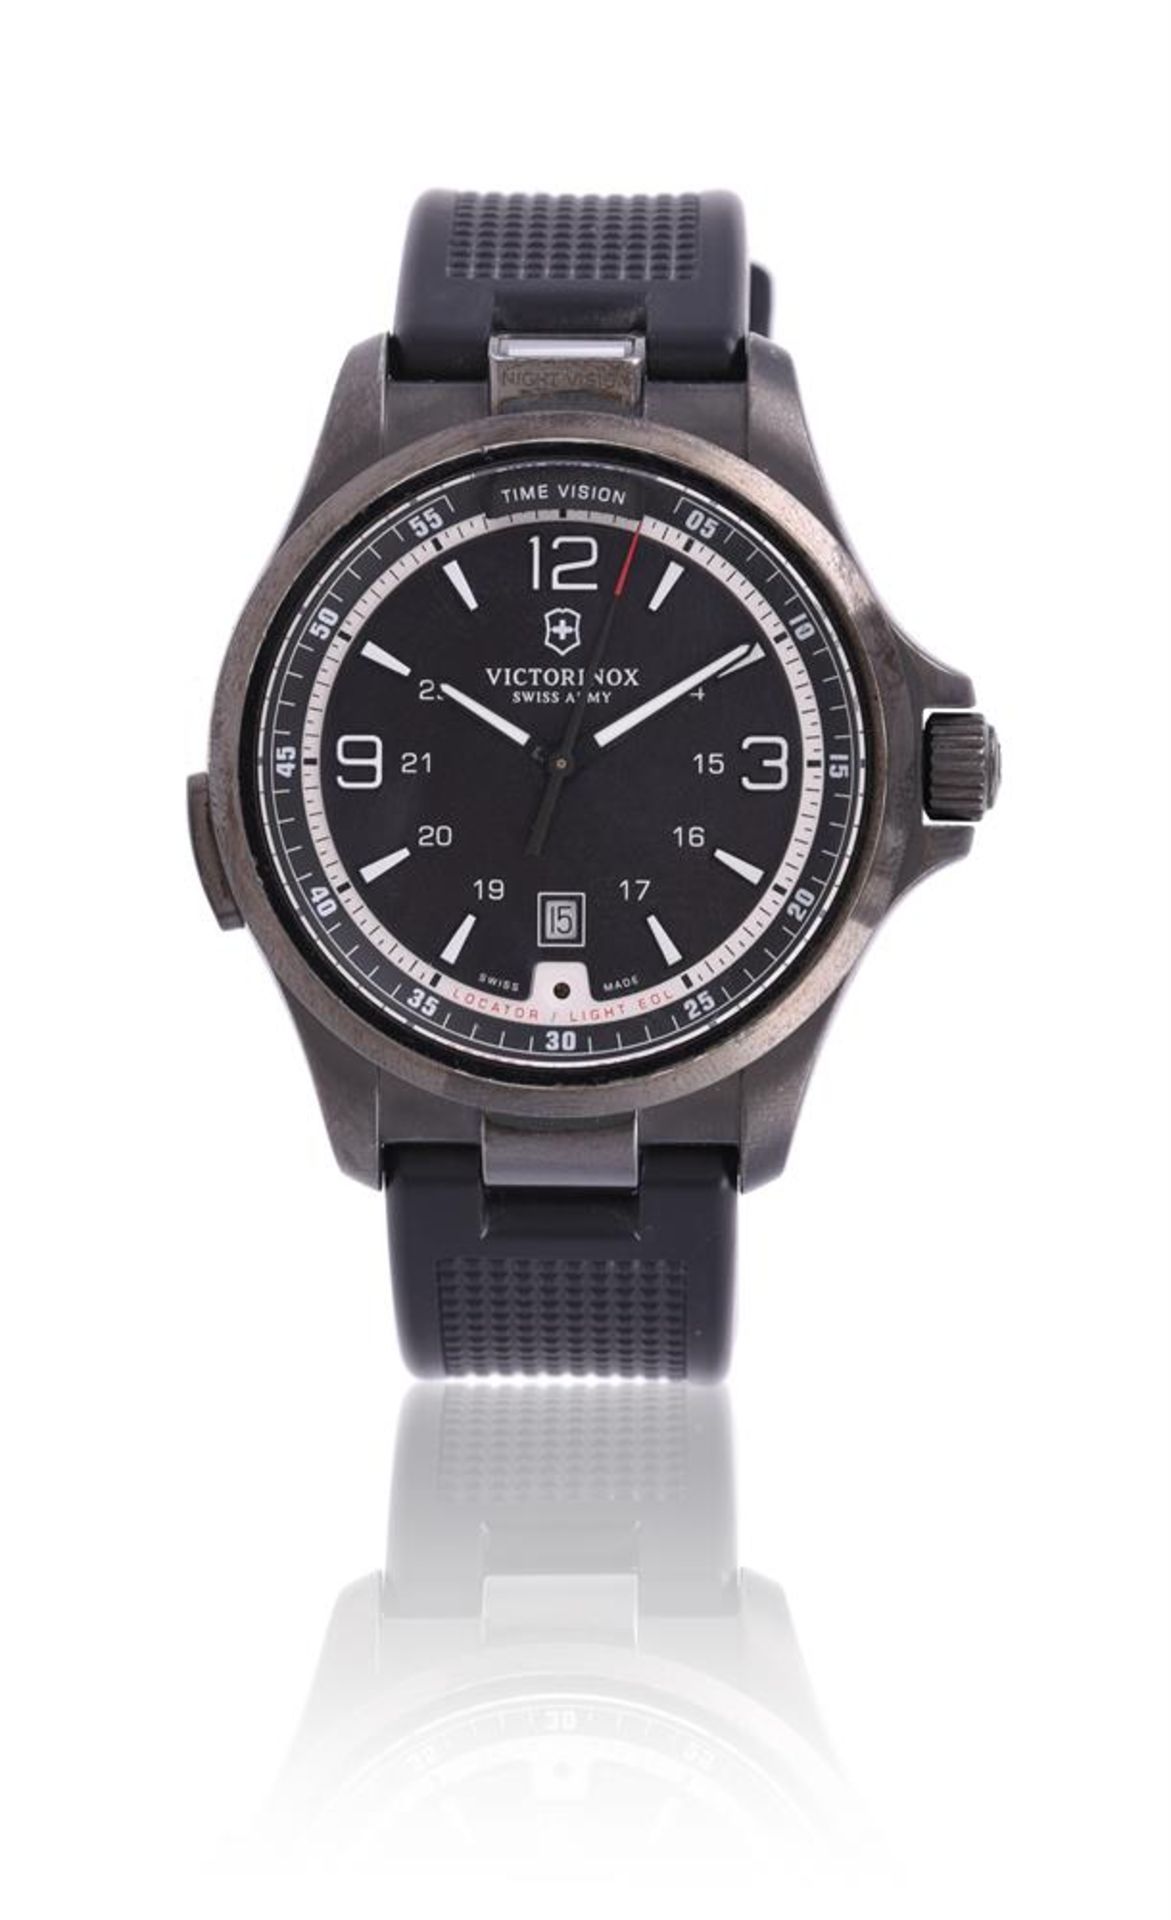 VICTORINOX, NIGHT VISION, REF. 241596 BLACK COATED STAINLESS STEEL WRIST WATCH WITH DATE